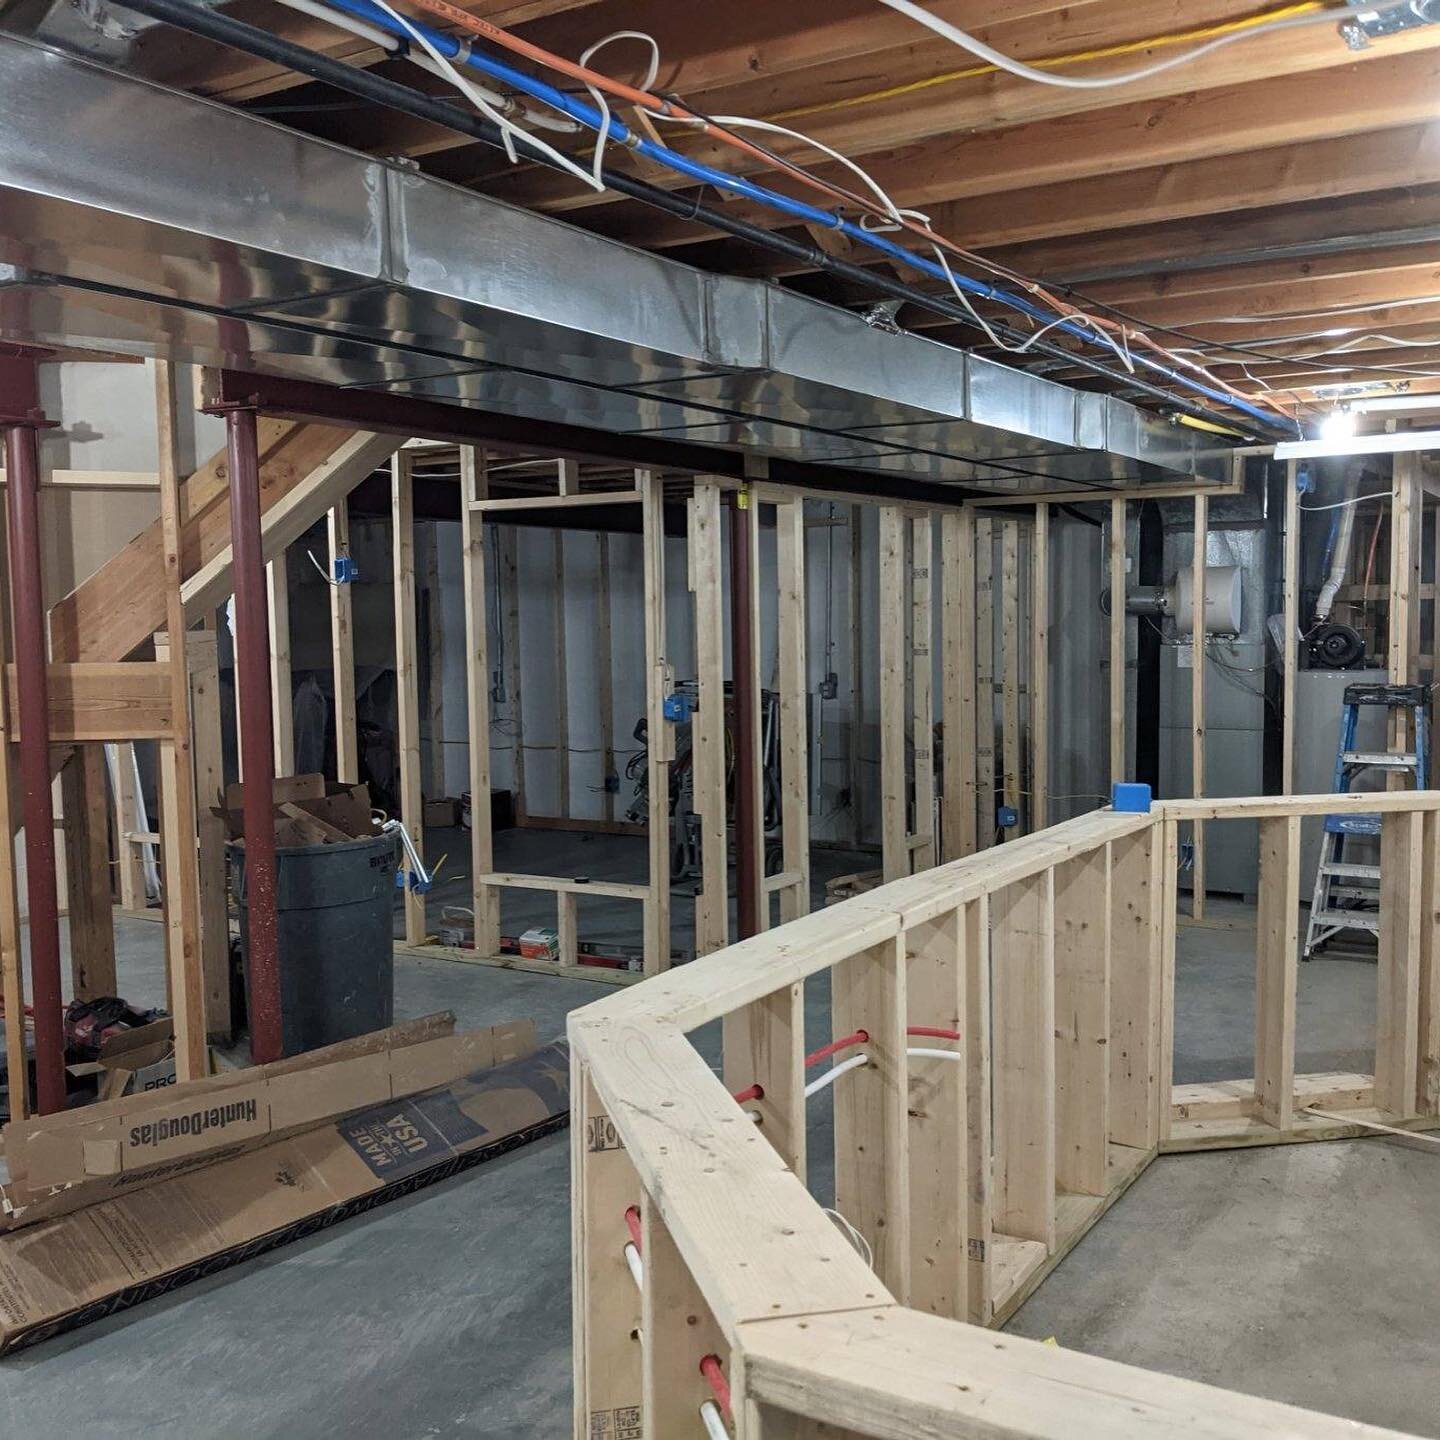 Large custom bar and finishing basement project.  We are exciting to see how this one takes shape.  Client has planned an awesome pub style look. Drywall starting tomorrow.